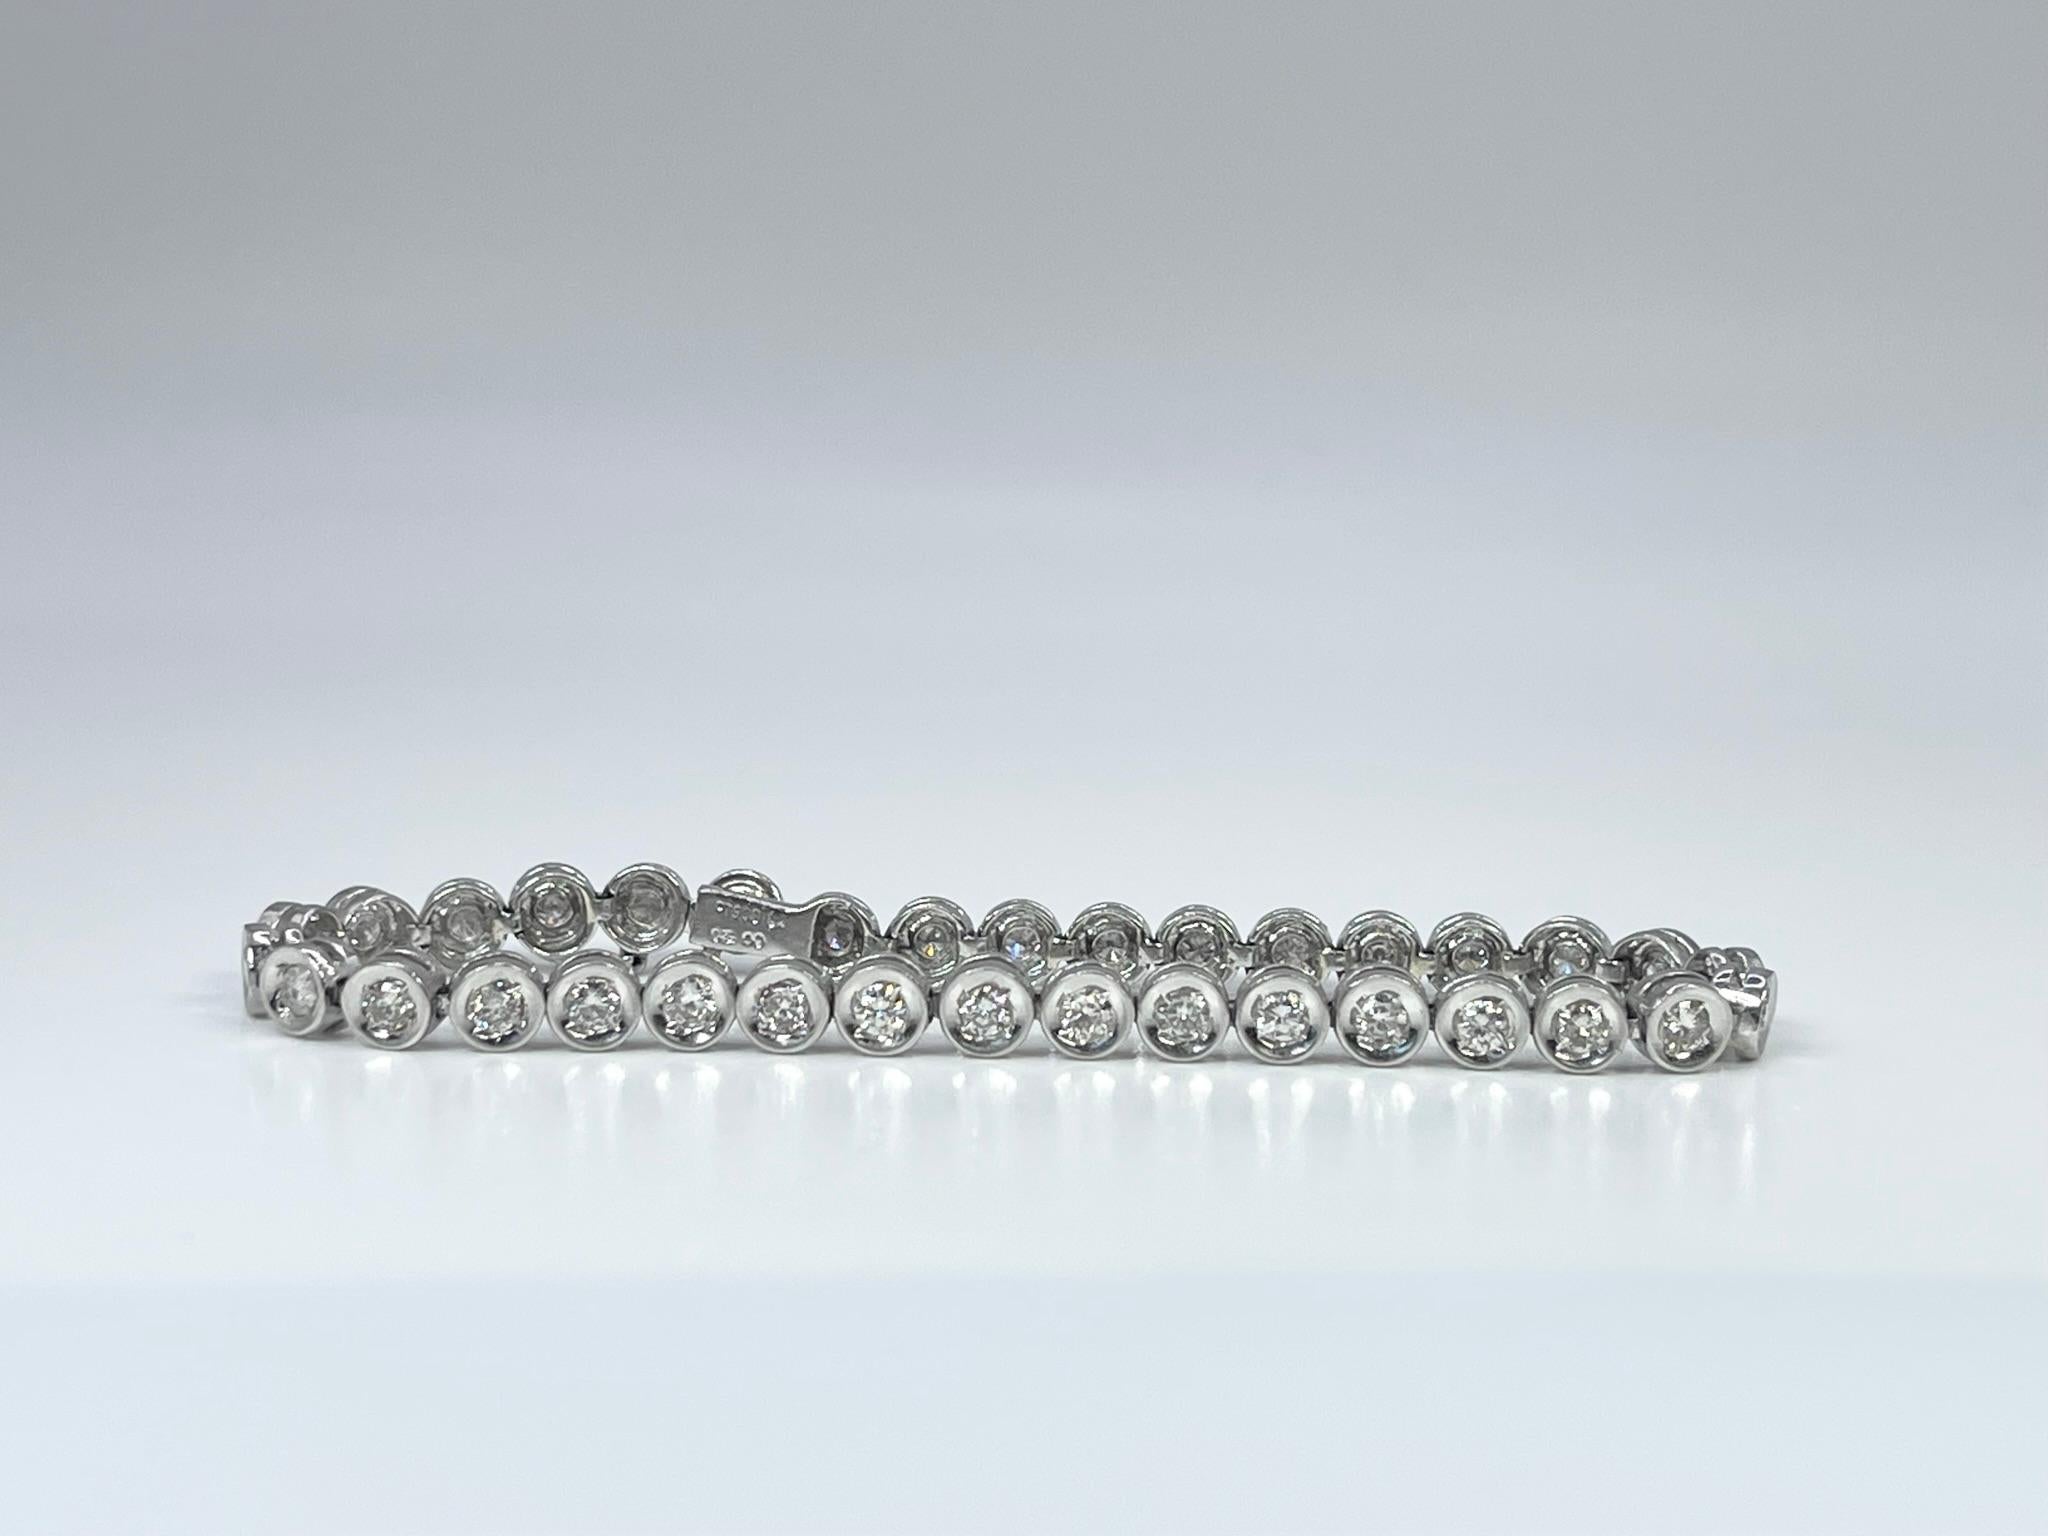 Diamond Tennis bracelet made in platinum, finished to perfections with fine diamonds and craftsmanship.

GRAM WEIGHT: 20.60gr
METAL: platinum

NATURAL DIAMOND(S)
Cut: Round Brilliant
Color: F-G 
Clarity: VS-SI 
Carat: 2.72ct
Length: 7